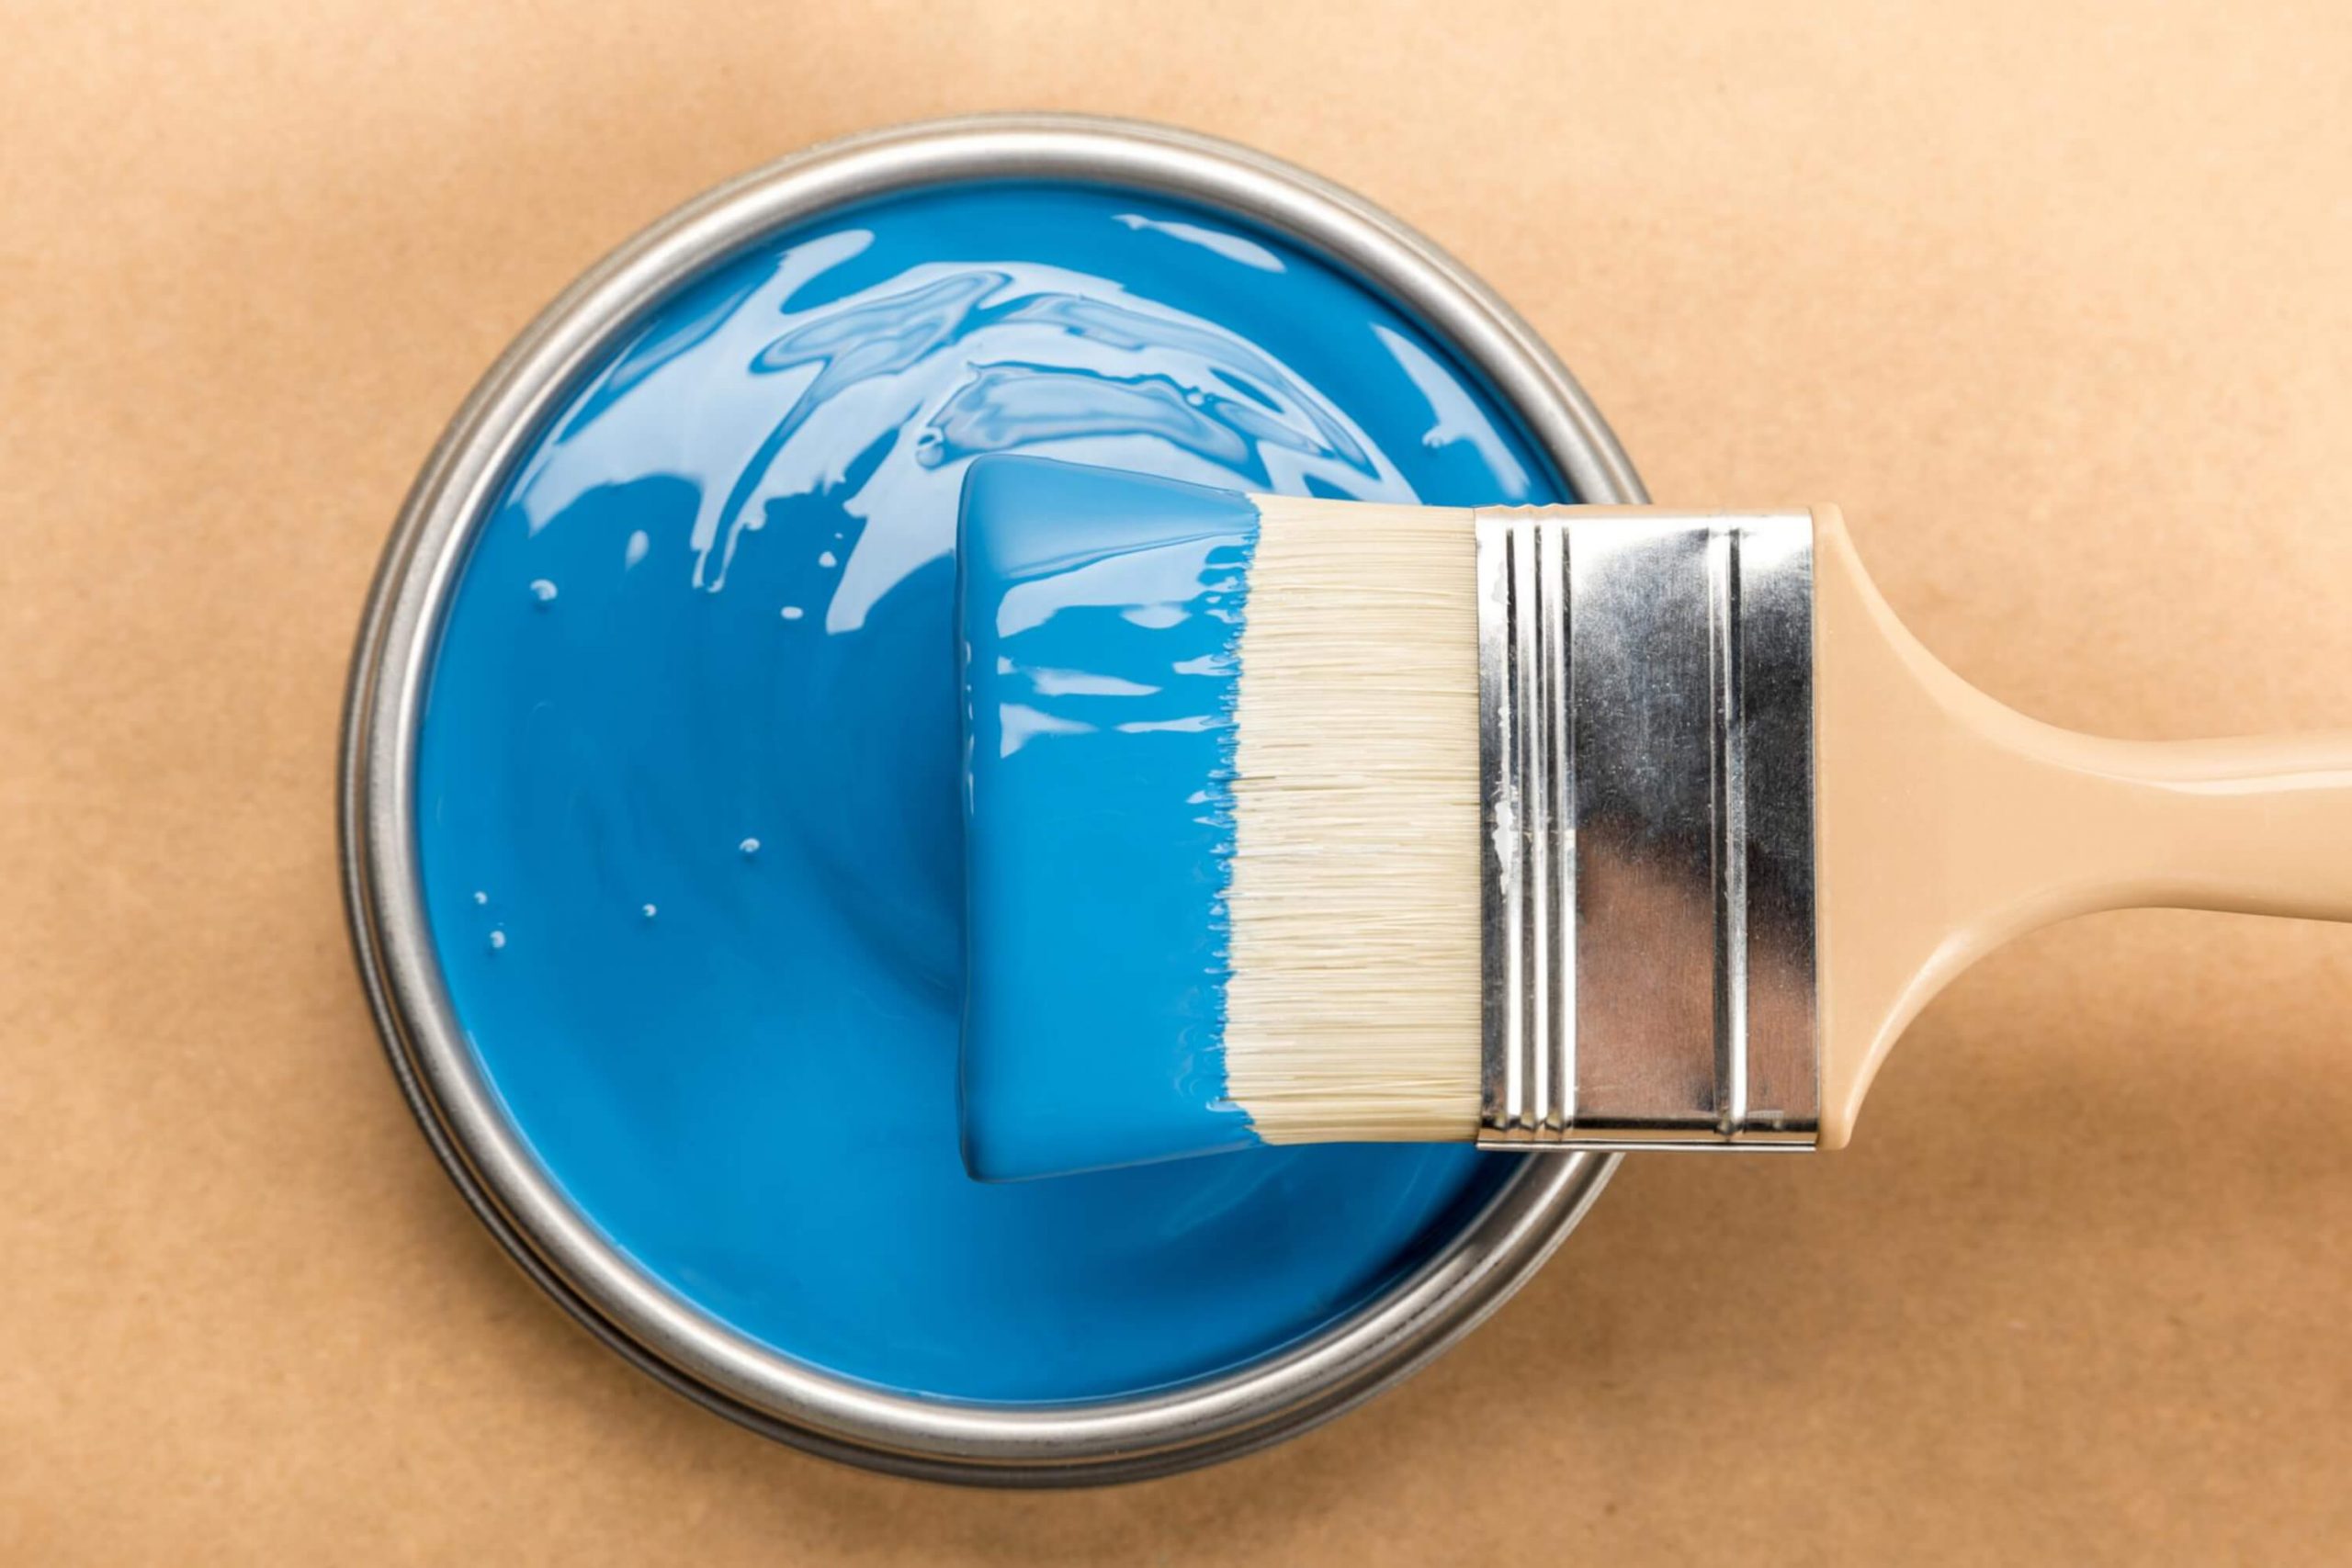 What Sizes Can You Buy Paint In